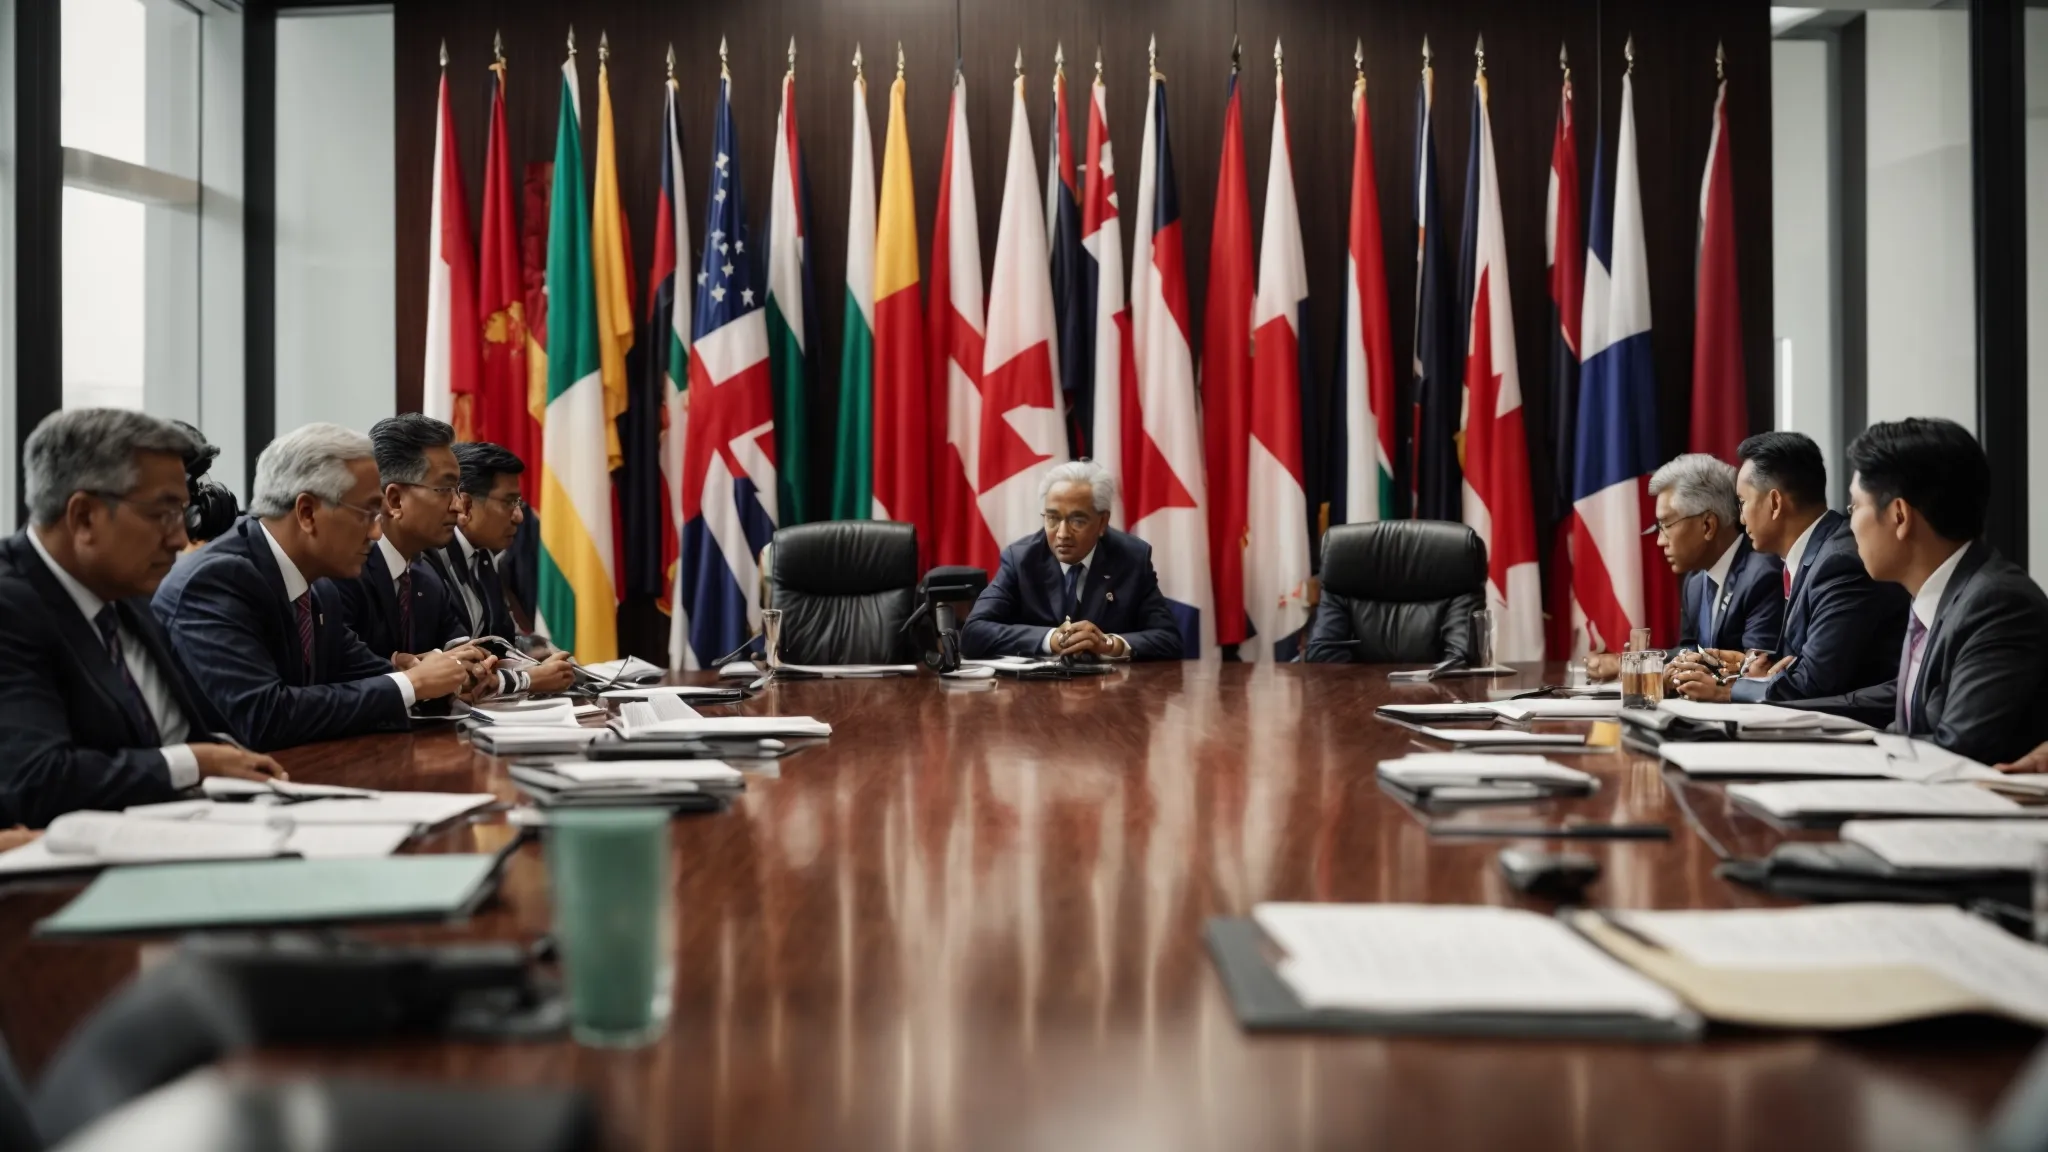 a group of professionals around a conference table with flags of various countries, discussing documents.